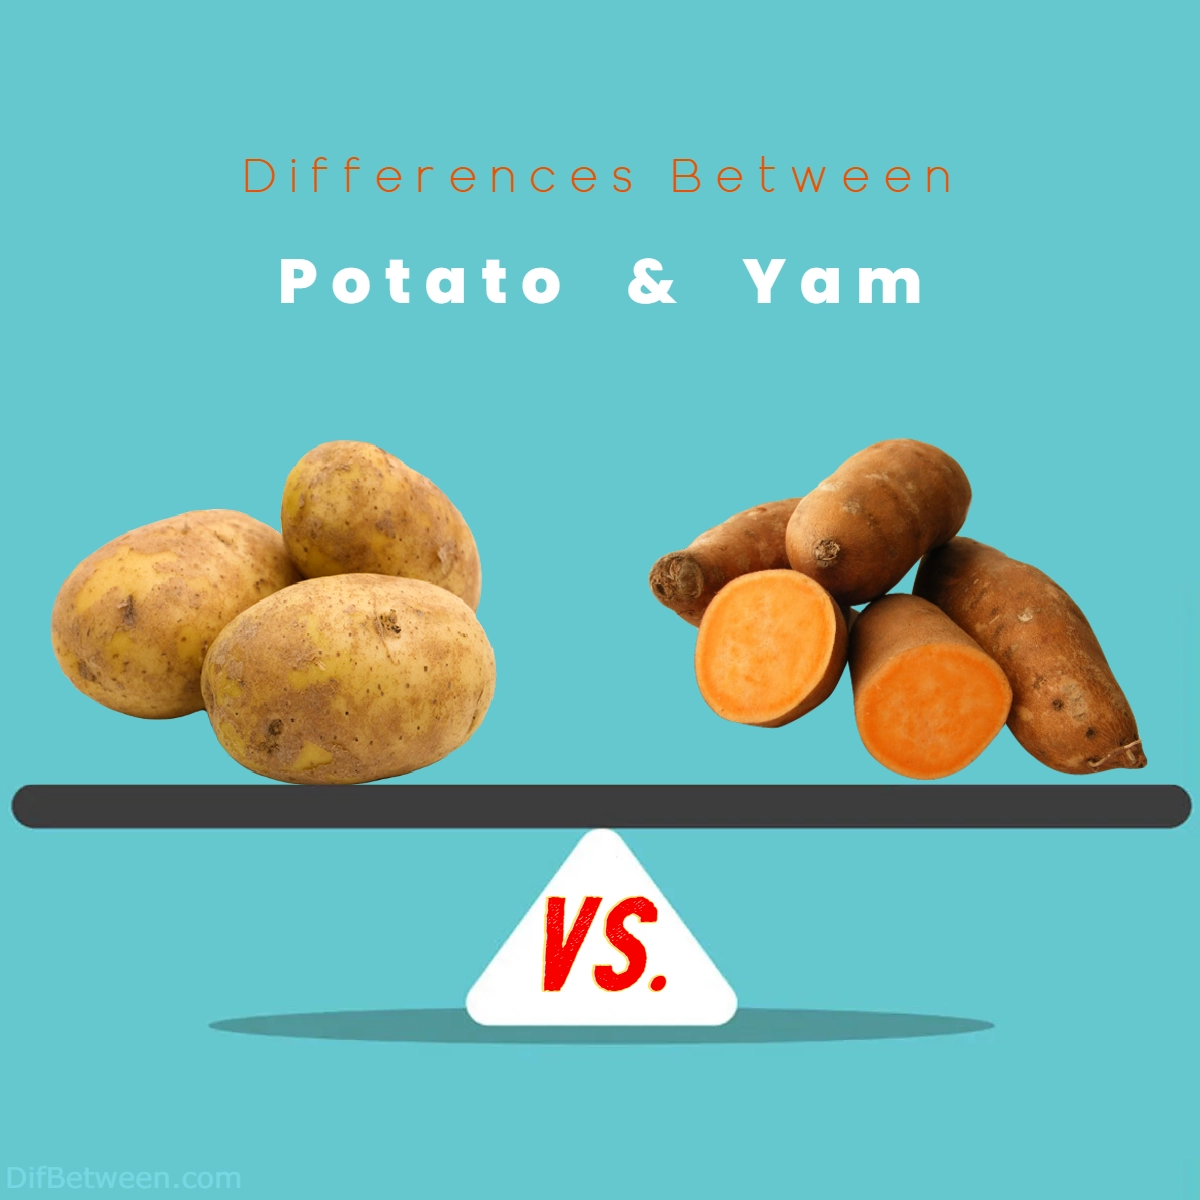 Difference Between Potato and Yam